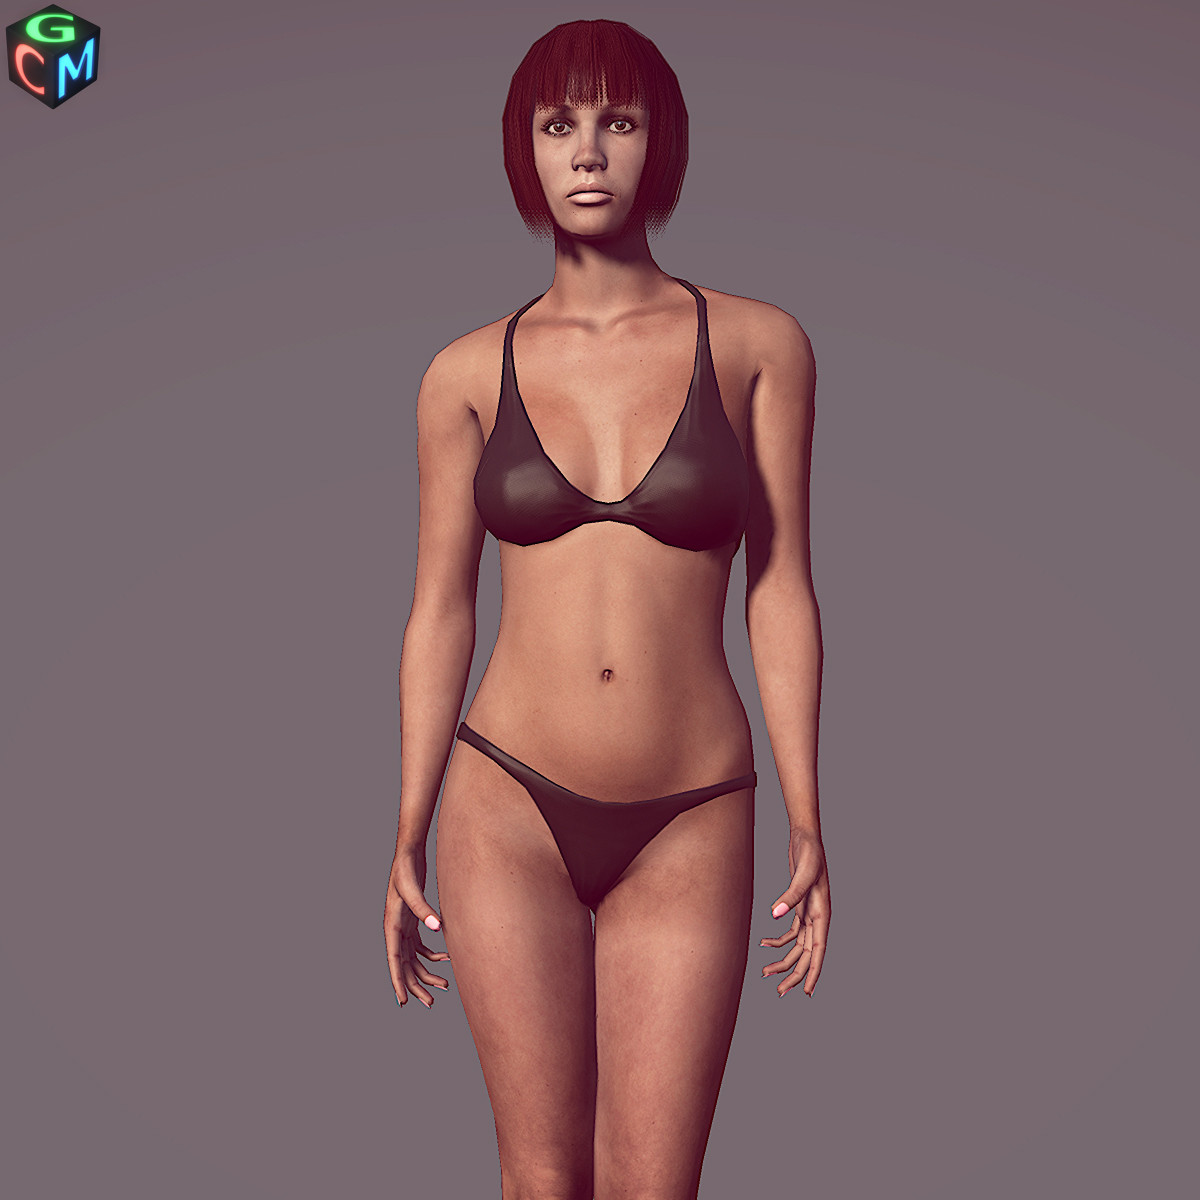 Best Site For 3D Model Rare Site For 3D models i will show you how to downl...